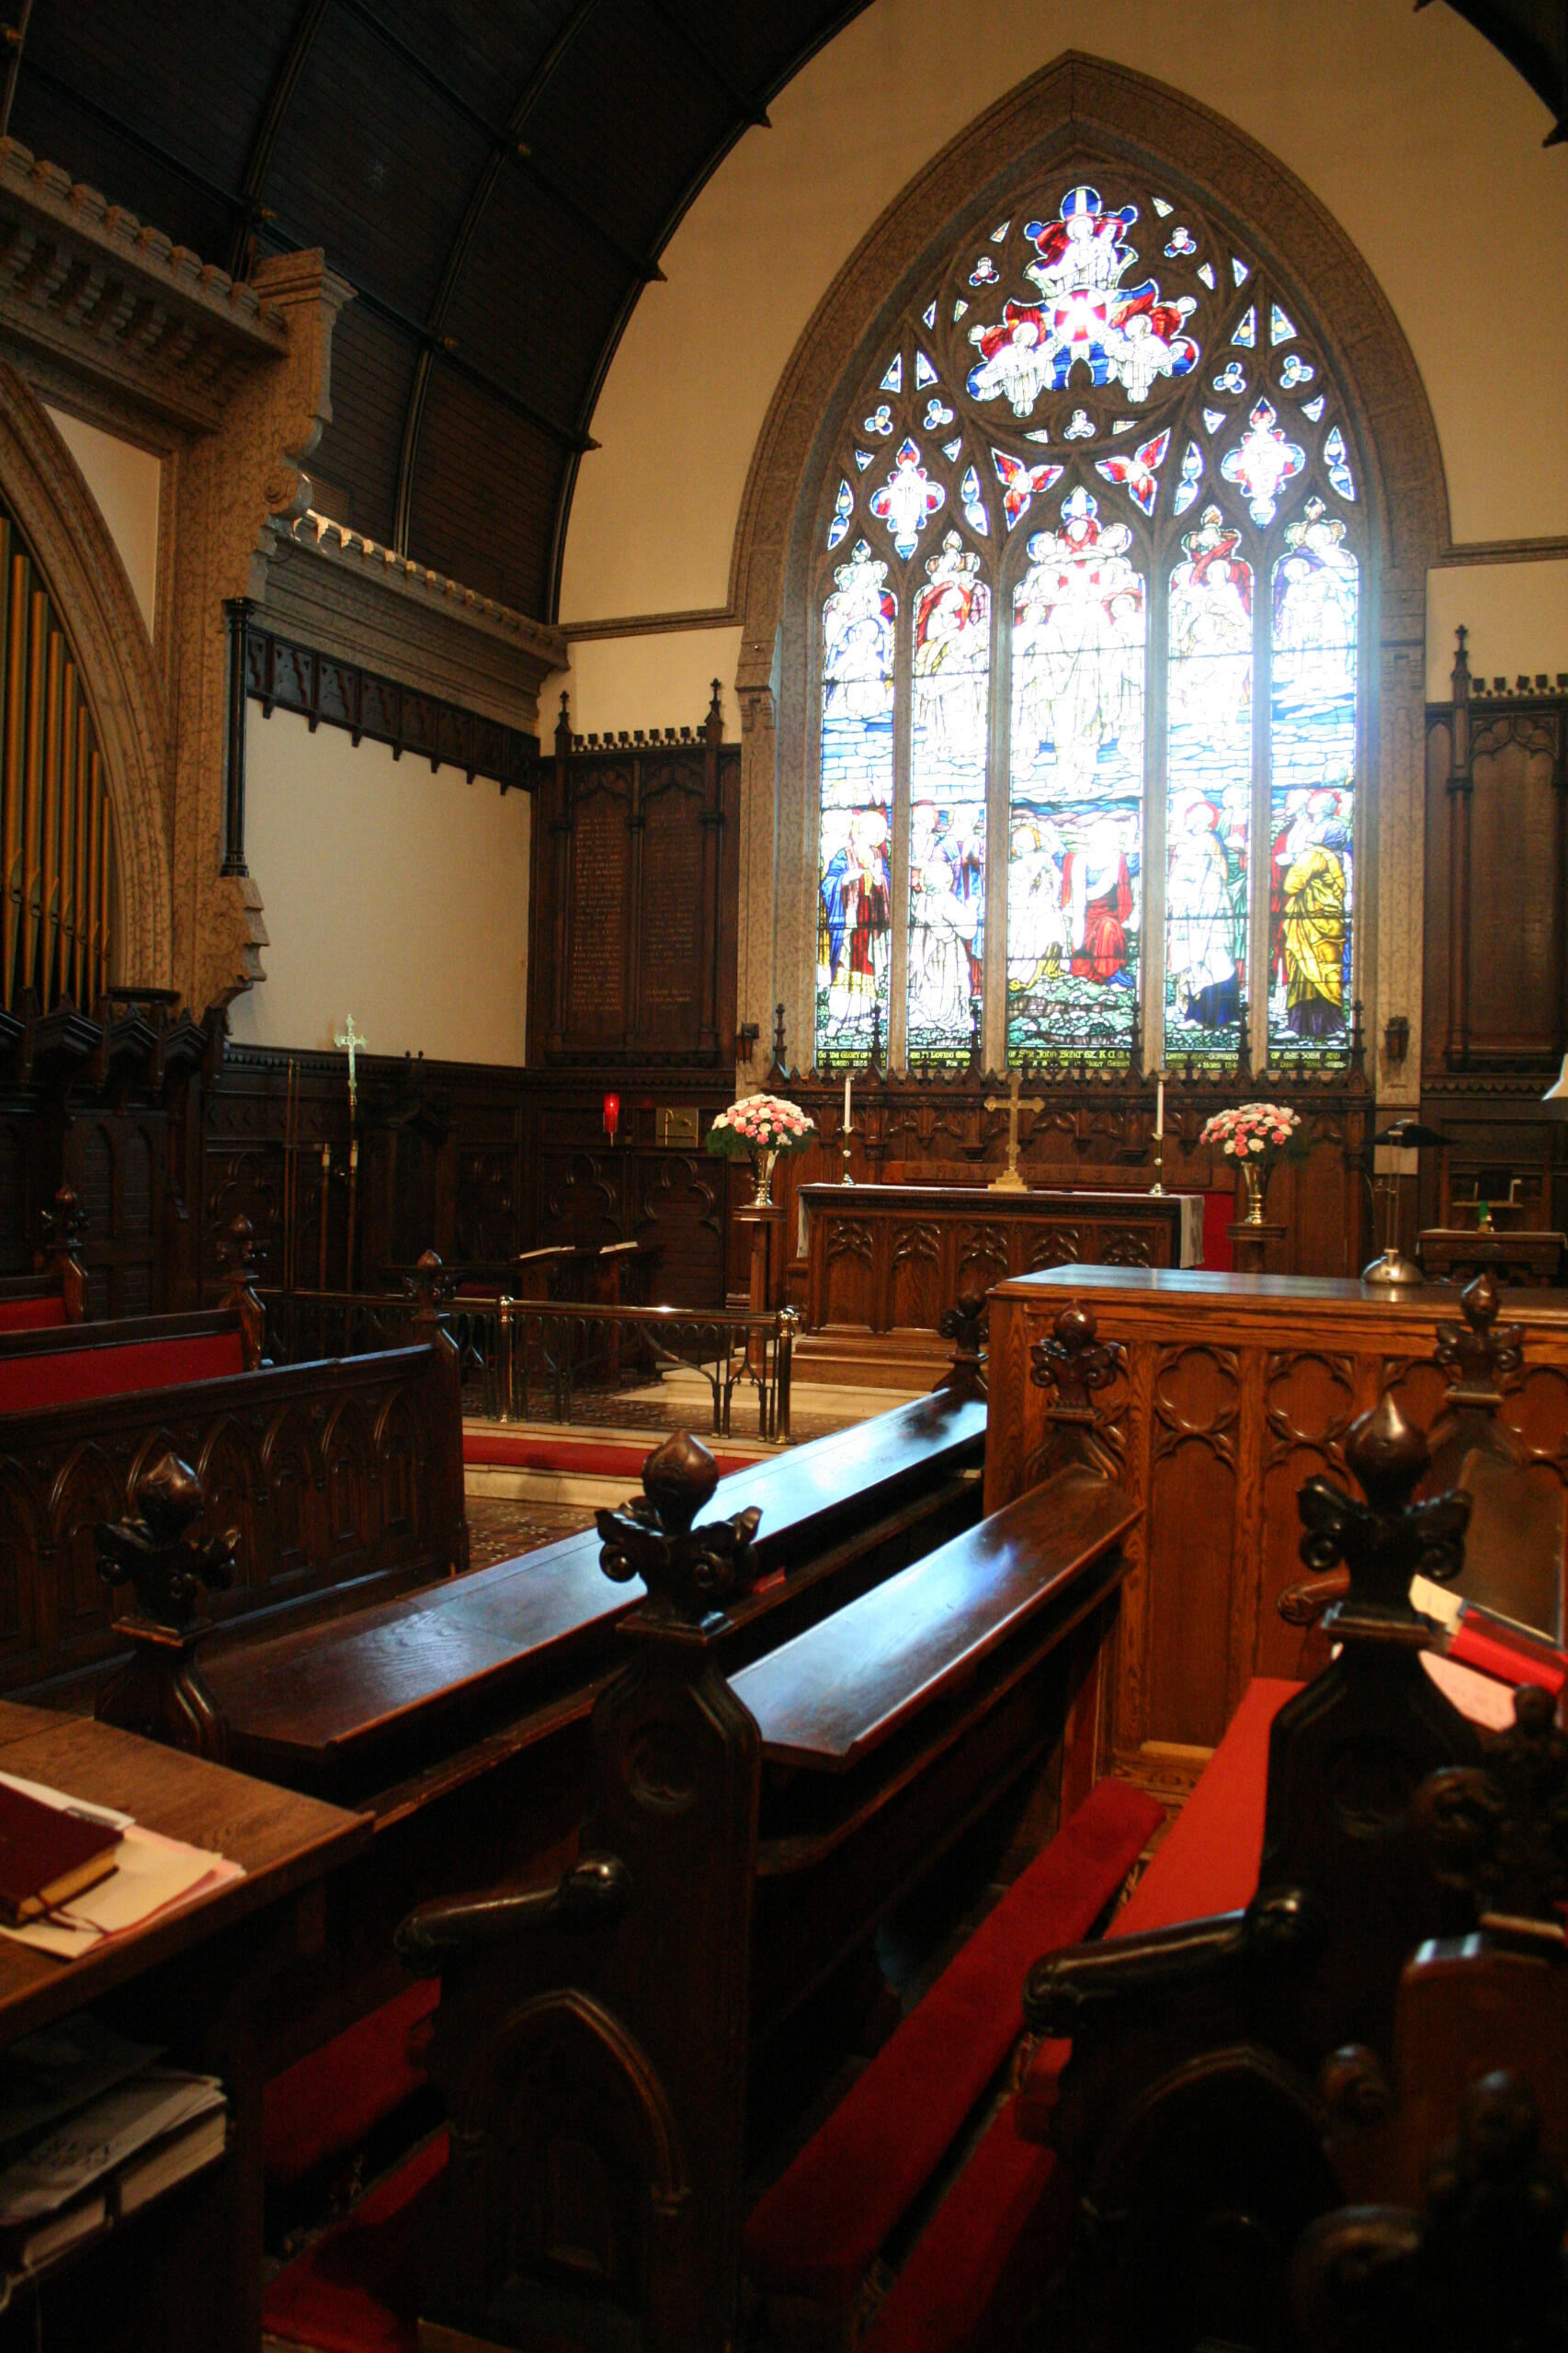 A photo of the chancel of Holy Trinity Anglican Church showing choir pews, the organ console, high altar, and great east window of the church.